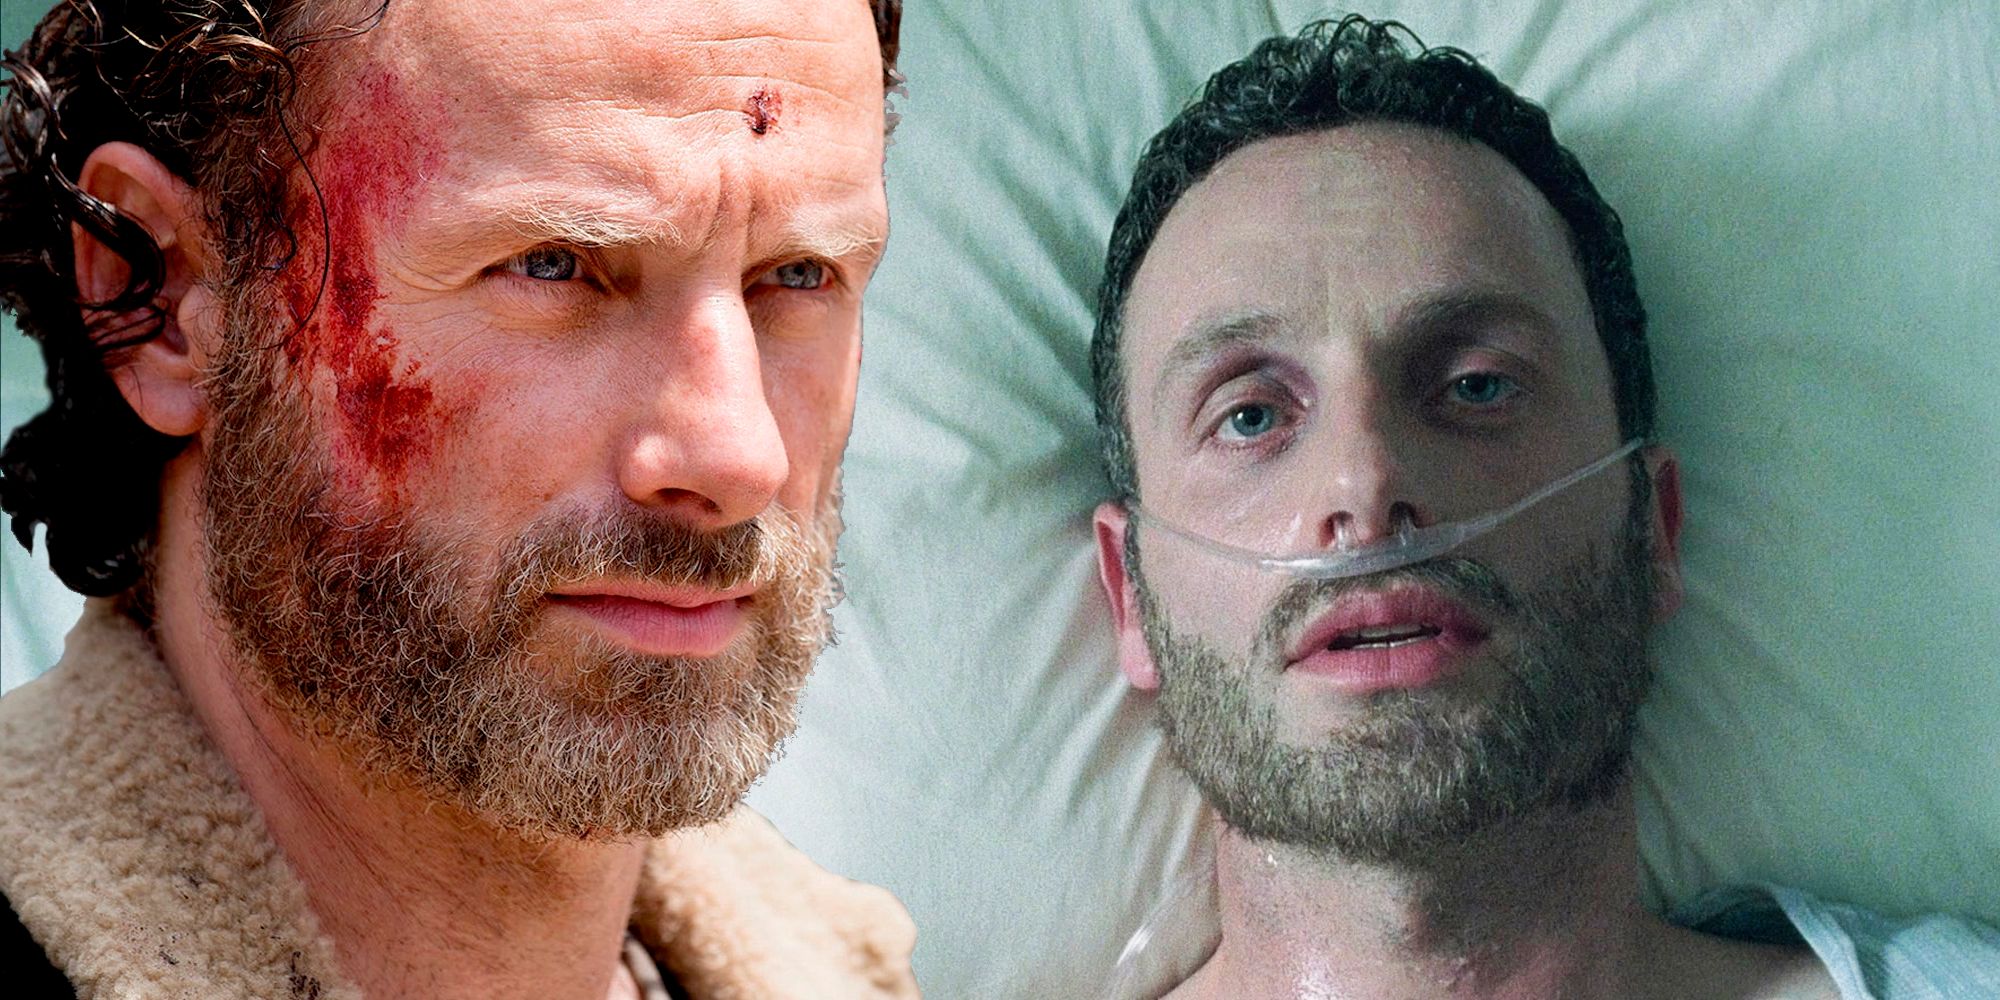 Andrew Lincoln as Rick Grimes in The Walking Dead.